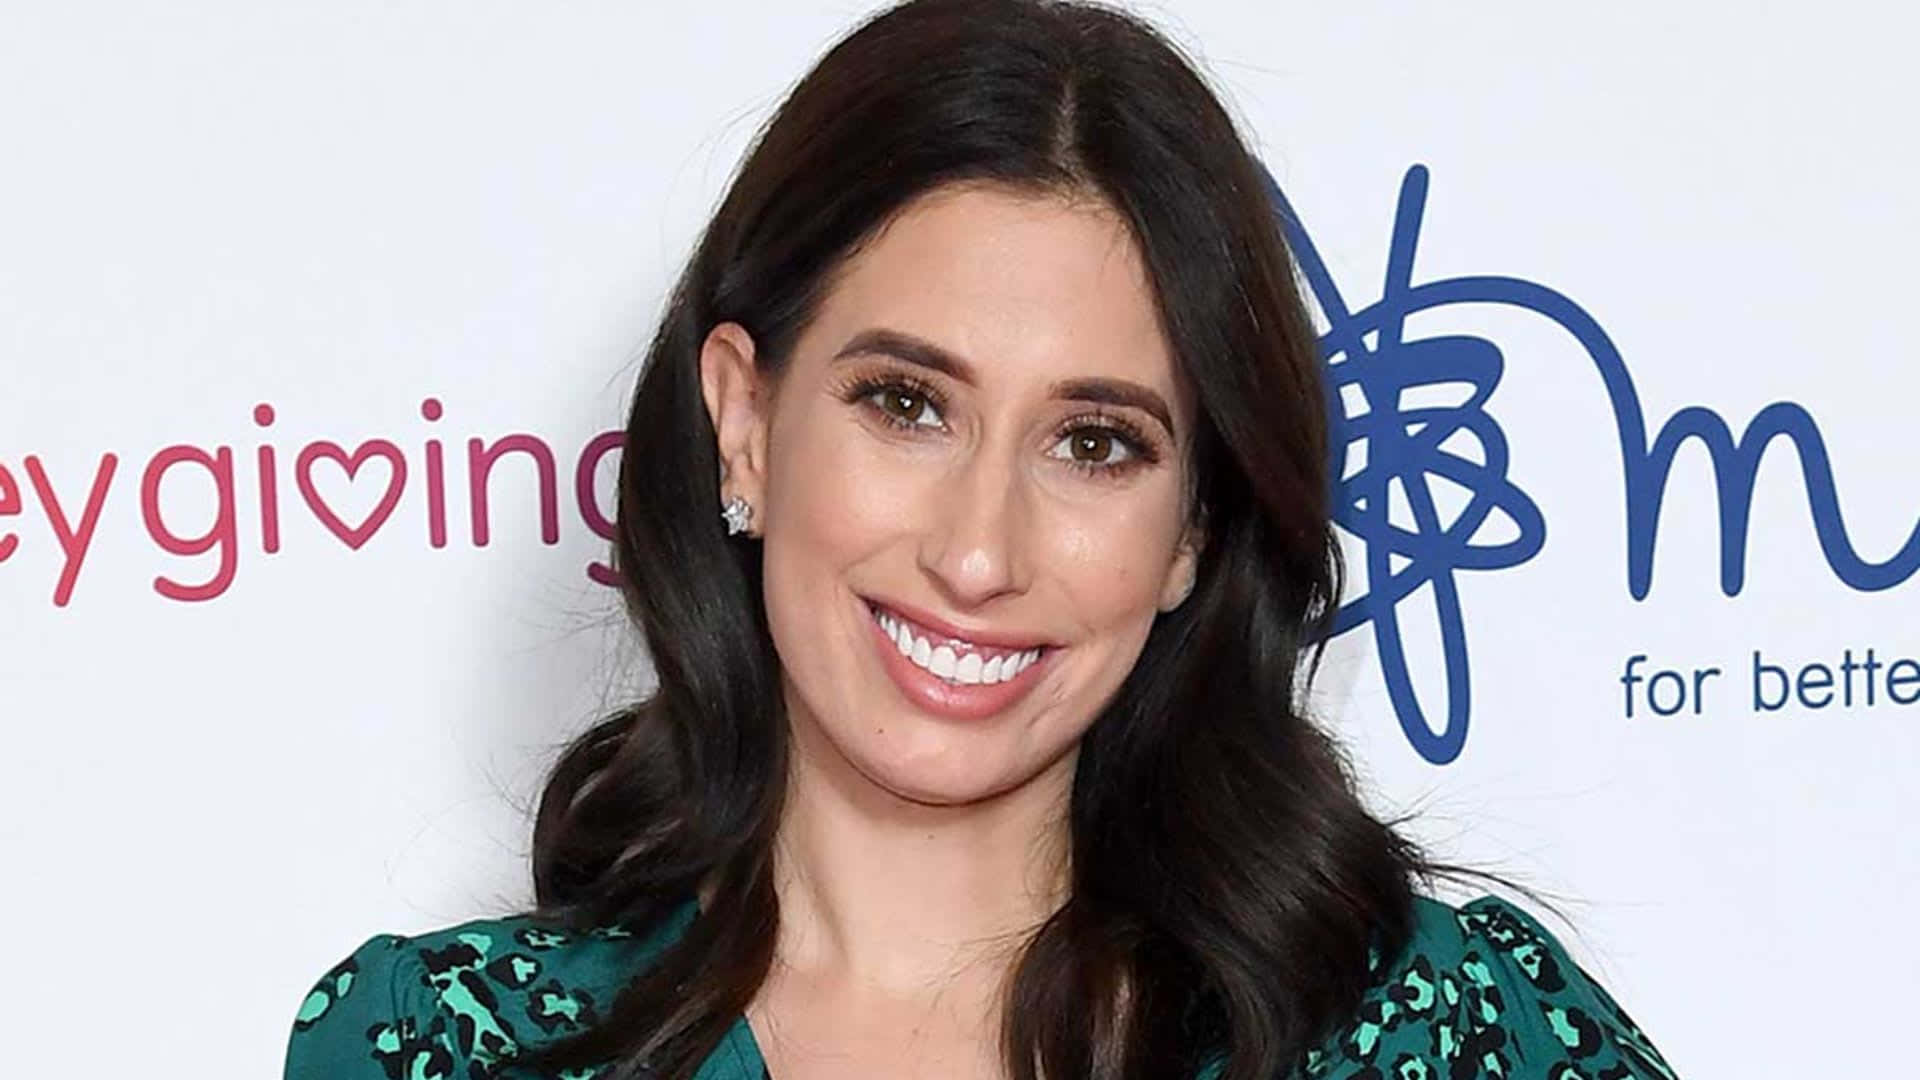 Stacey Solomon Charity Event Smile Wallpaper